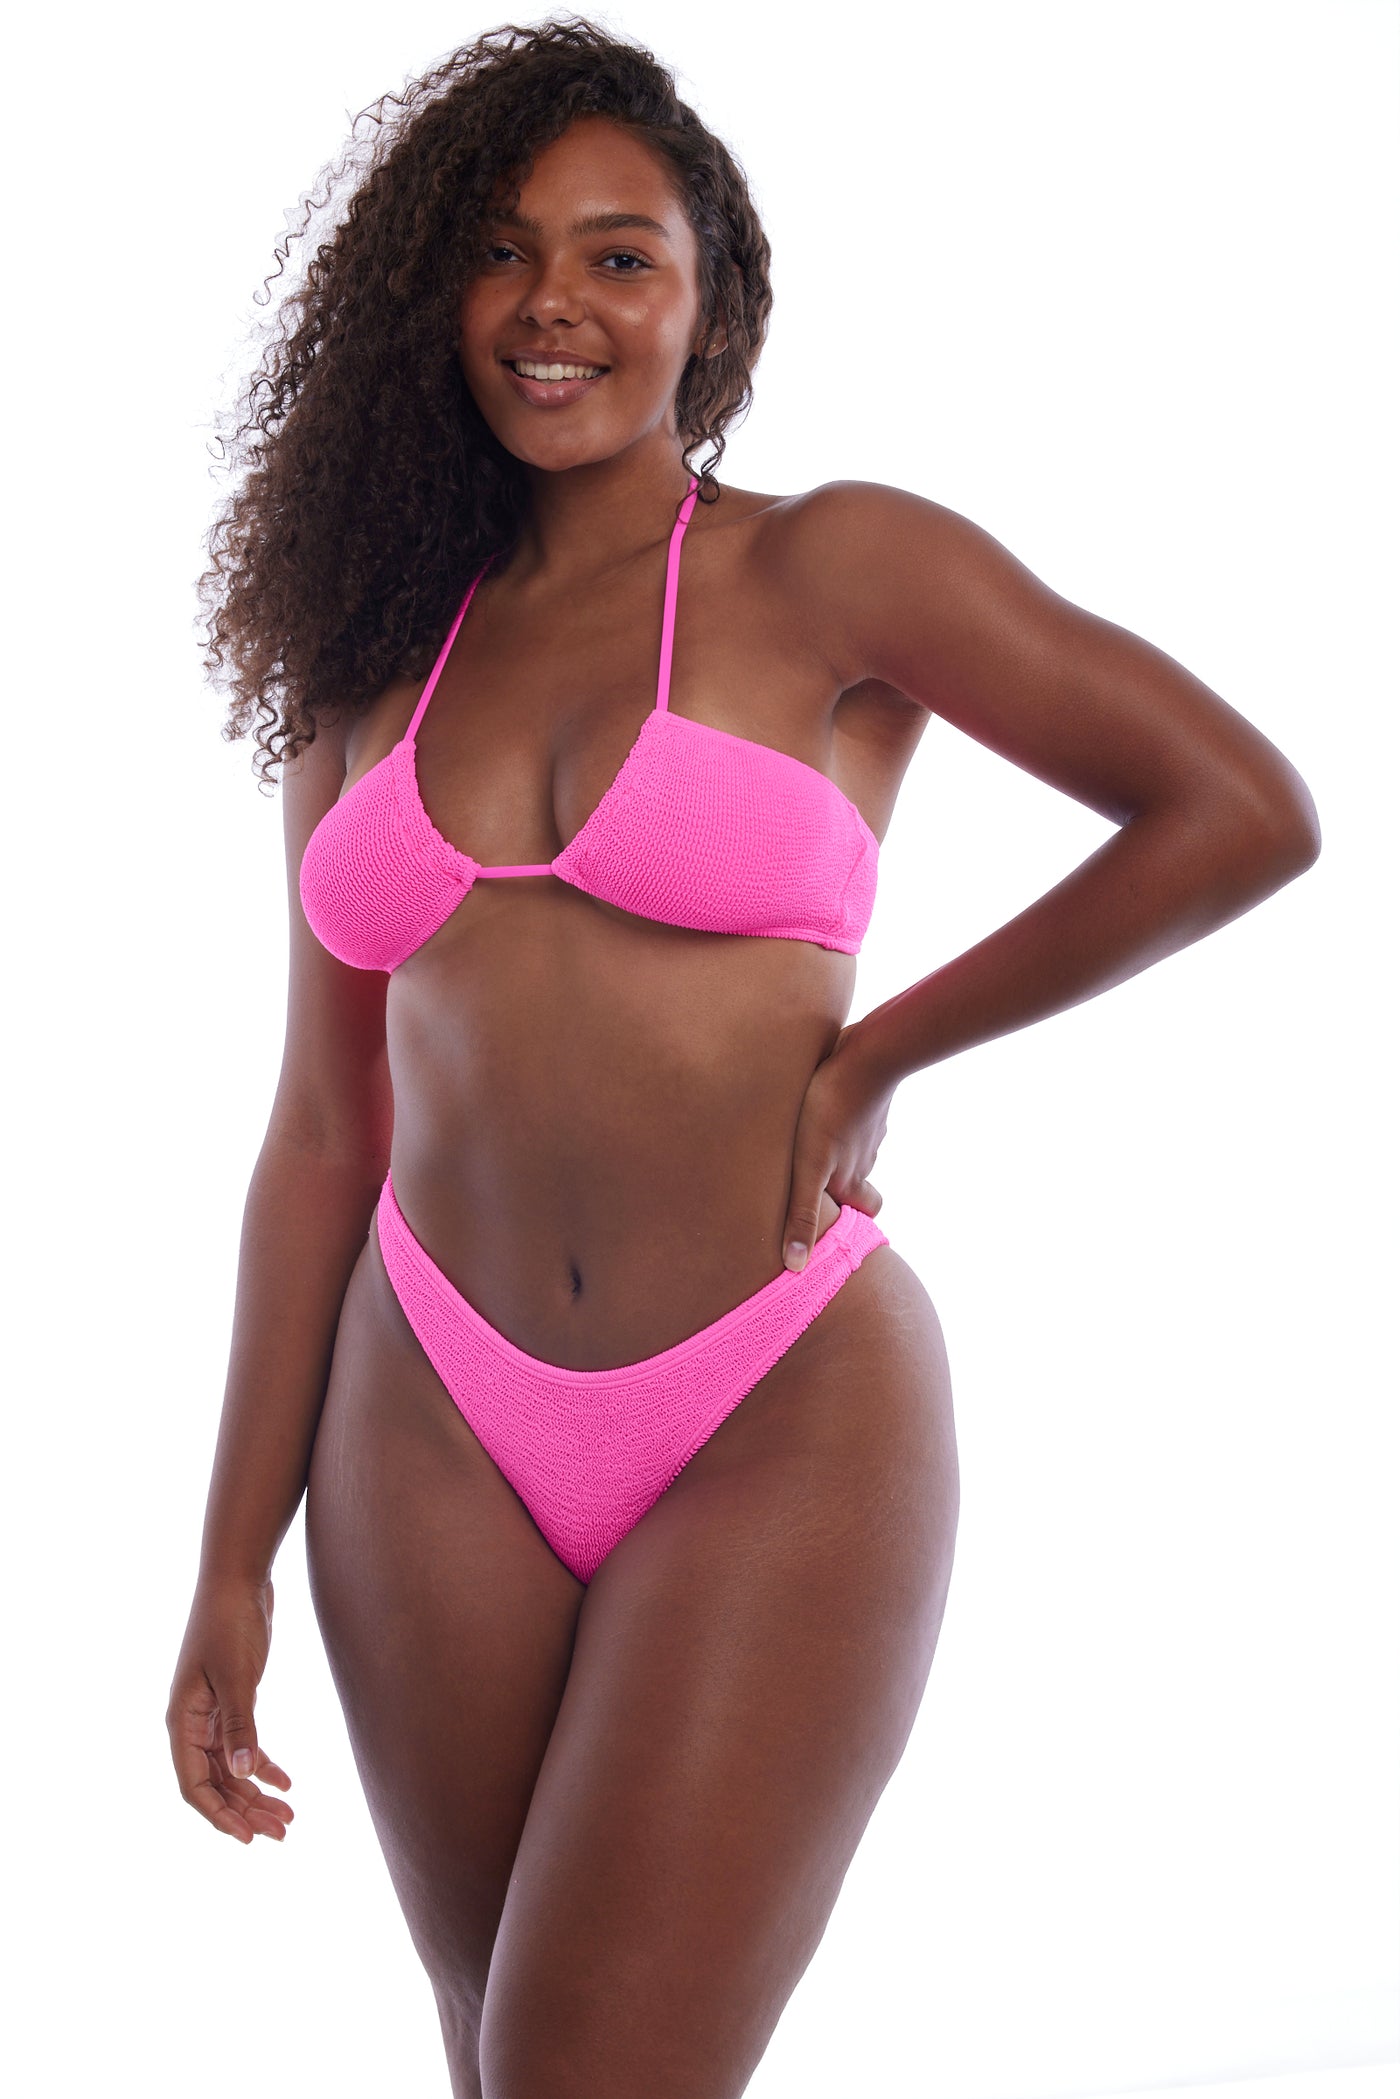 Venice Multi Style String One Size Bikini TOP ONLY (Hot Pink)